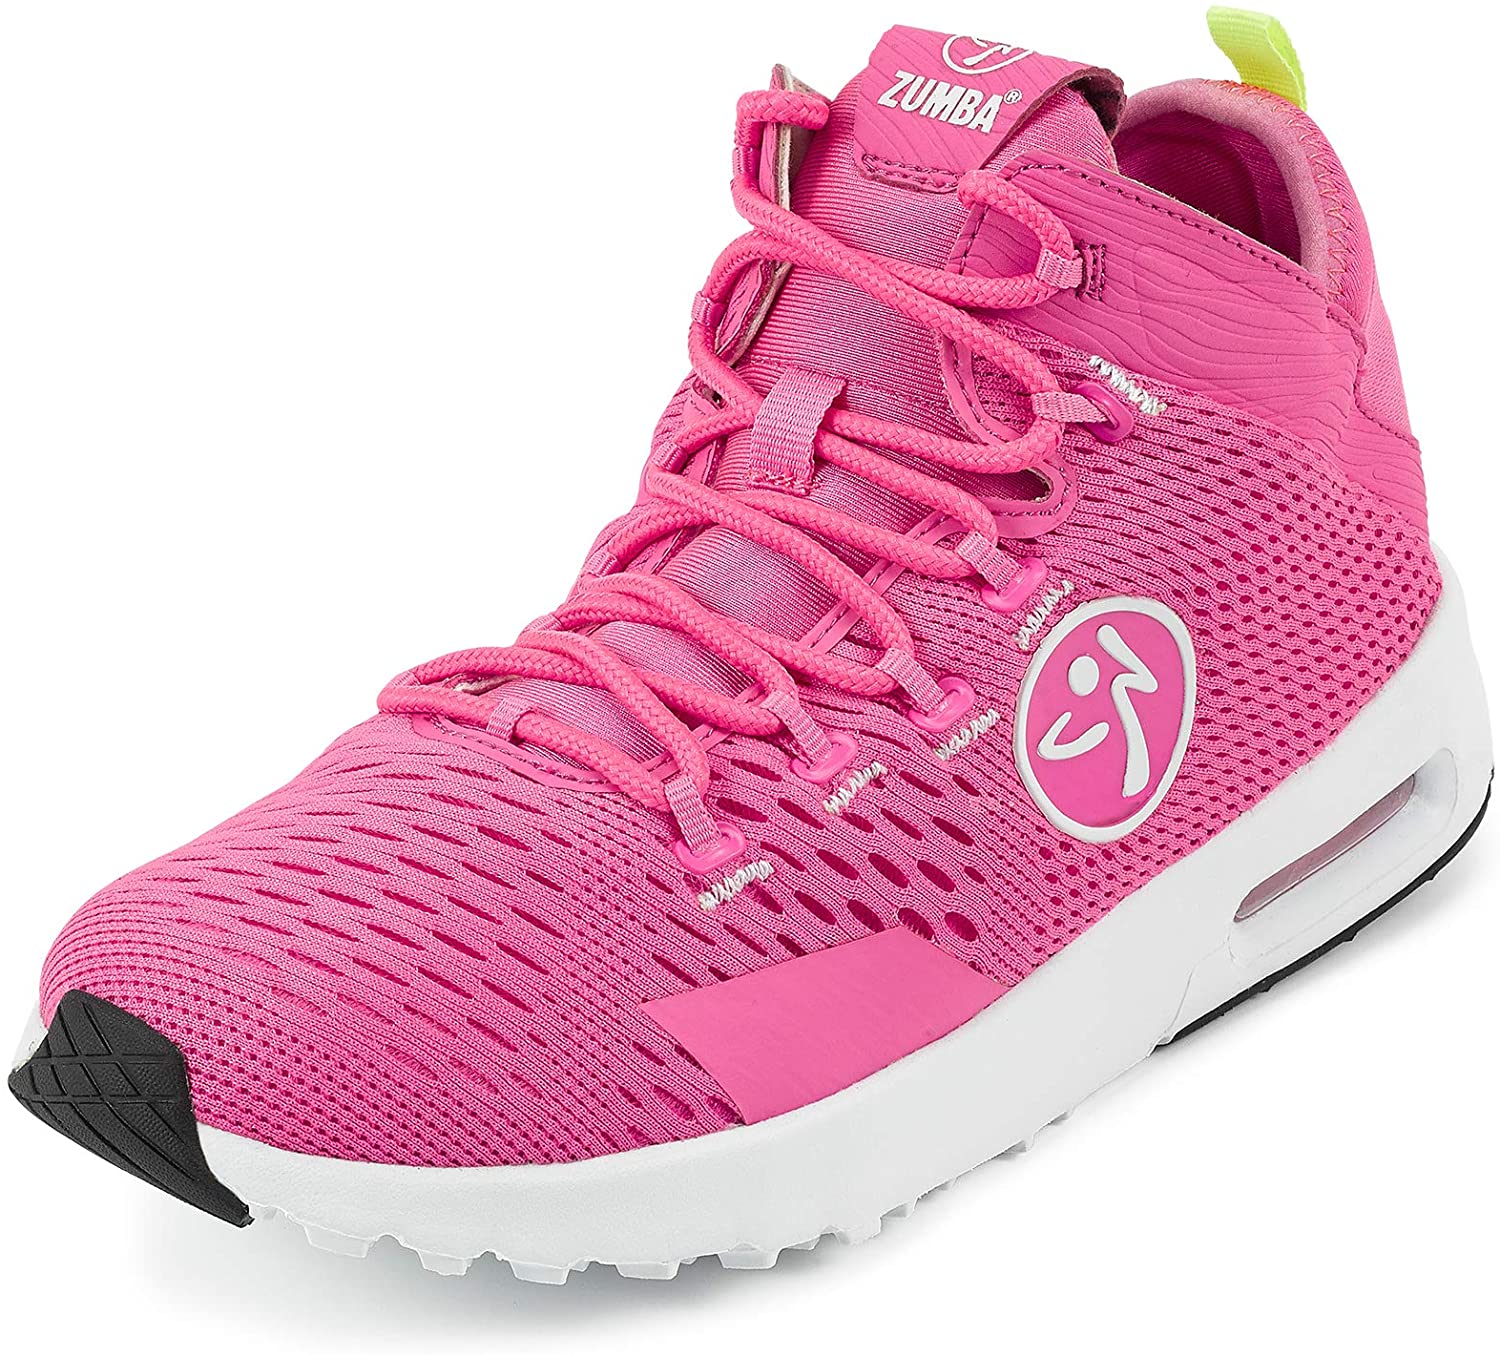 Zumba Womens Athletic Air Classic Gym Fitness Sneakers Dance Workout Shoes Cross Trainer 